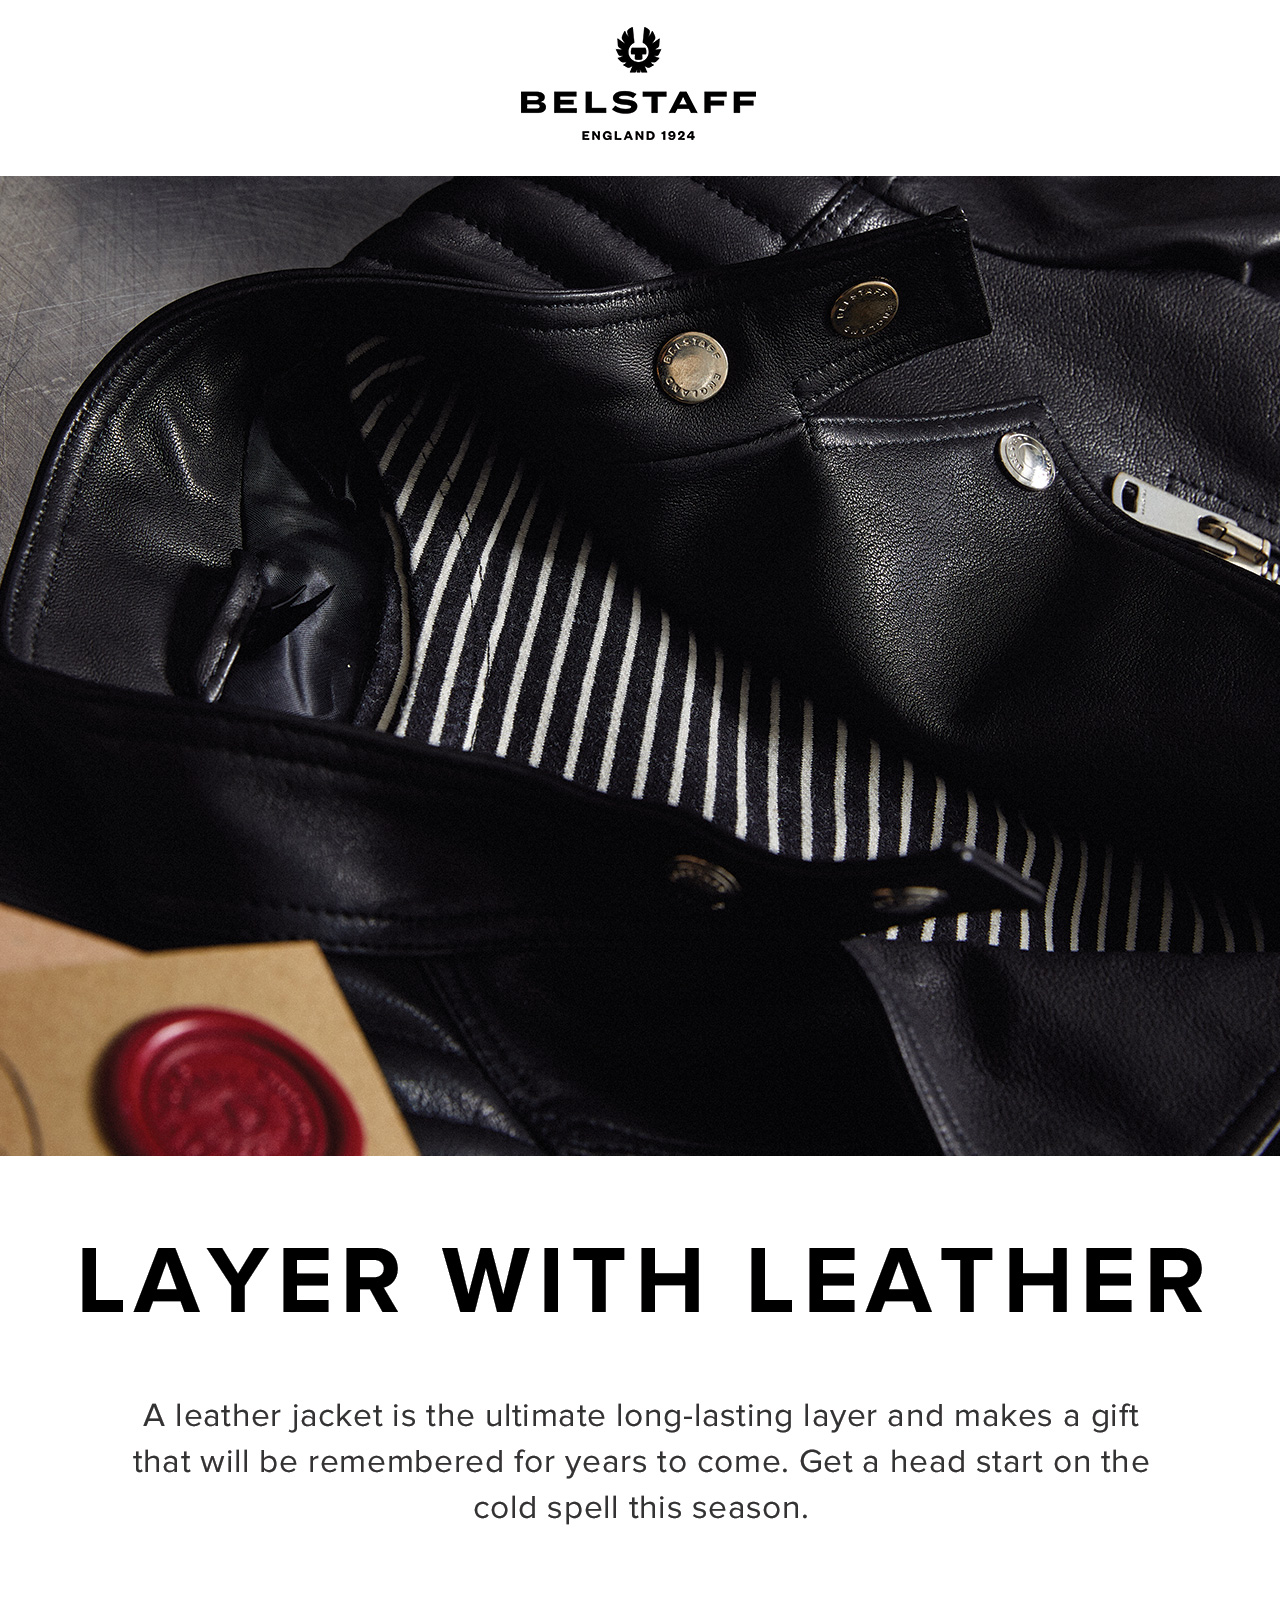 A leather jacket is the ultimate long-lasting layer and makes a gift that will be remembered for years to come.